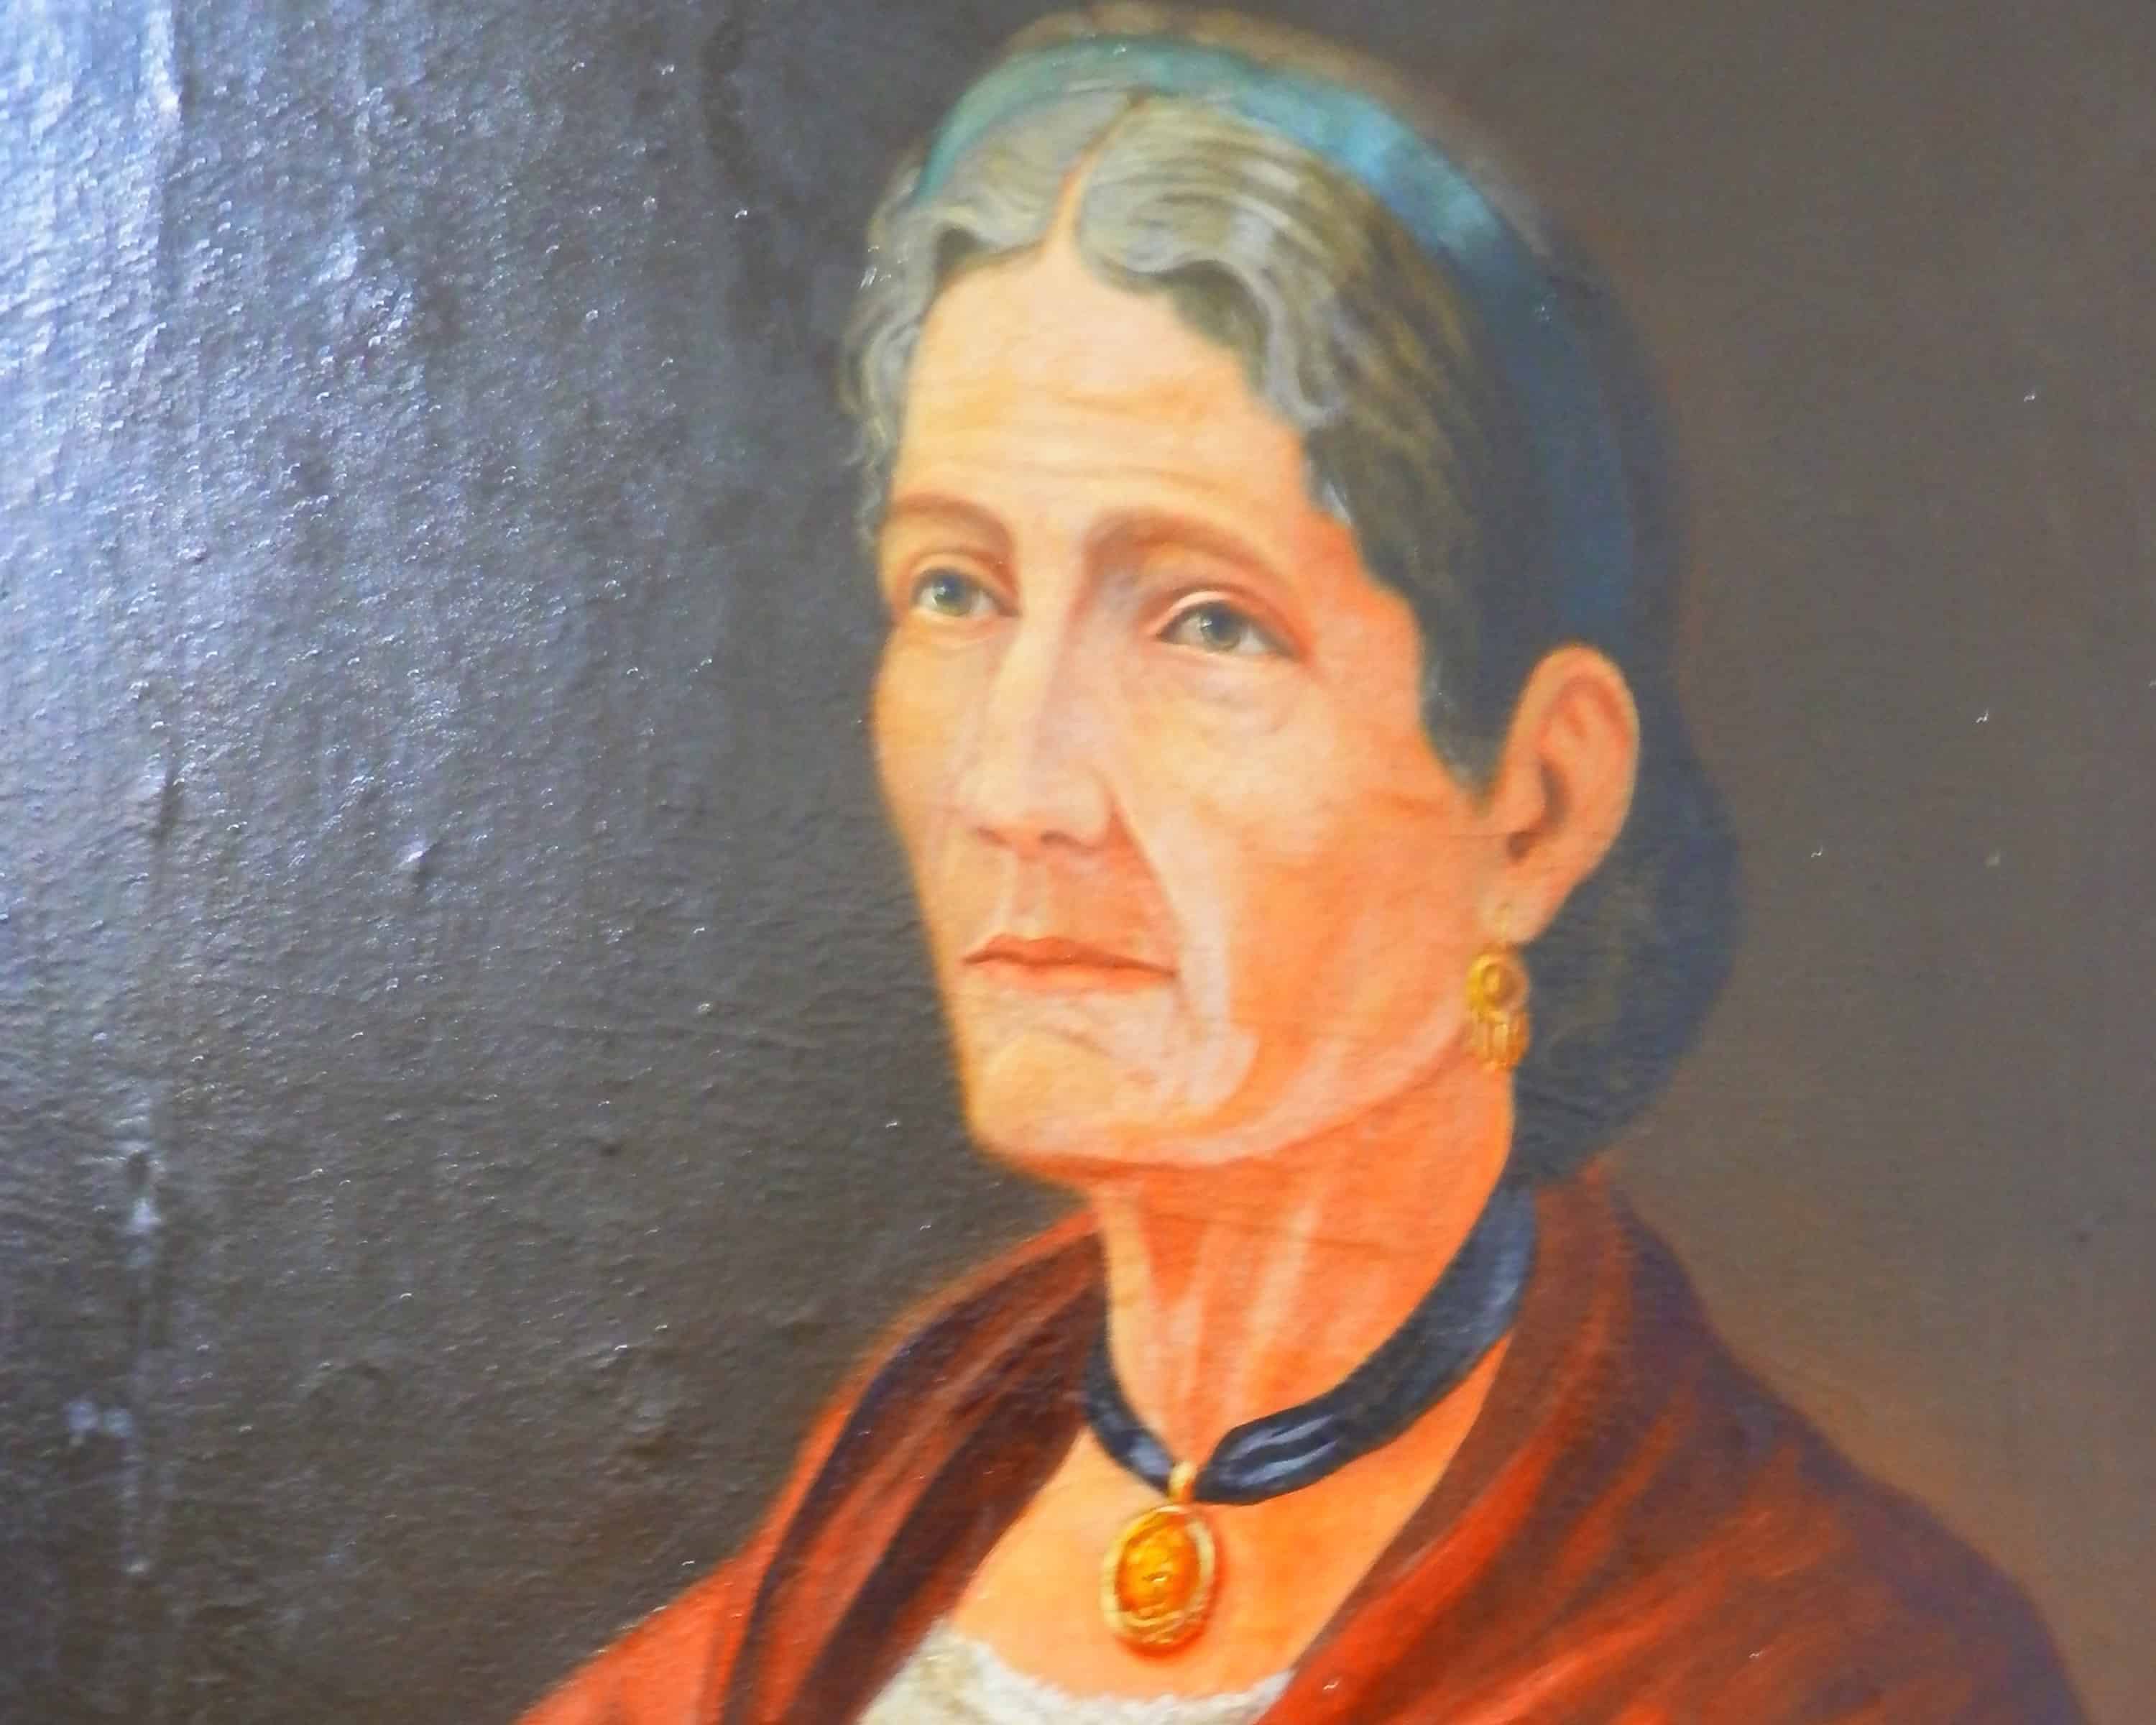 A portrait of Francisca ‘Pancha’ Carrasco. Born in 1816 in Taras de Cartago, she broke the rules for girls by learning to read, write and ride a horse. In public demonstrations against dictator Francisco Morazán in the 1840s Pancha led a mounted female brigade through the streets urging the public to oust this intruder from Honduras.